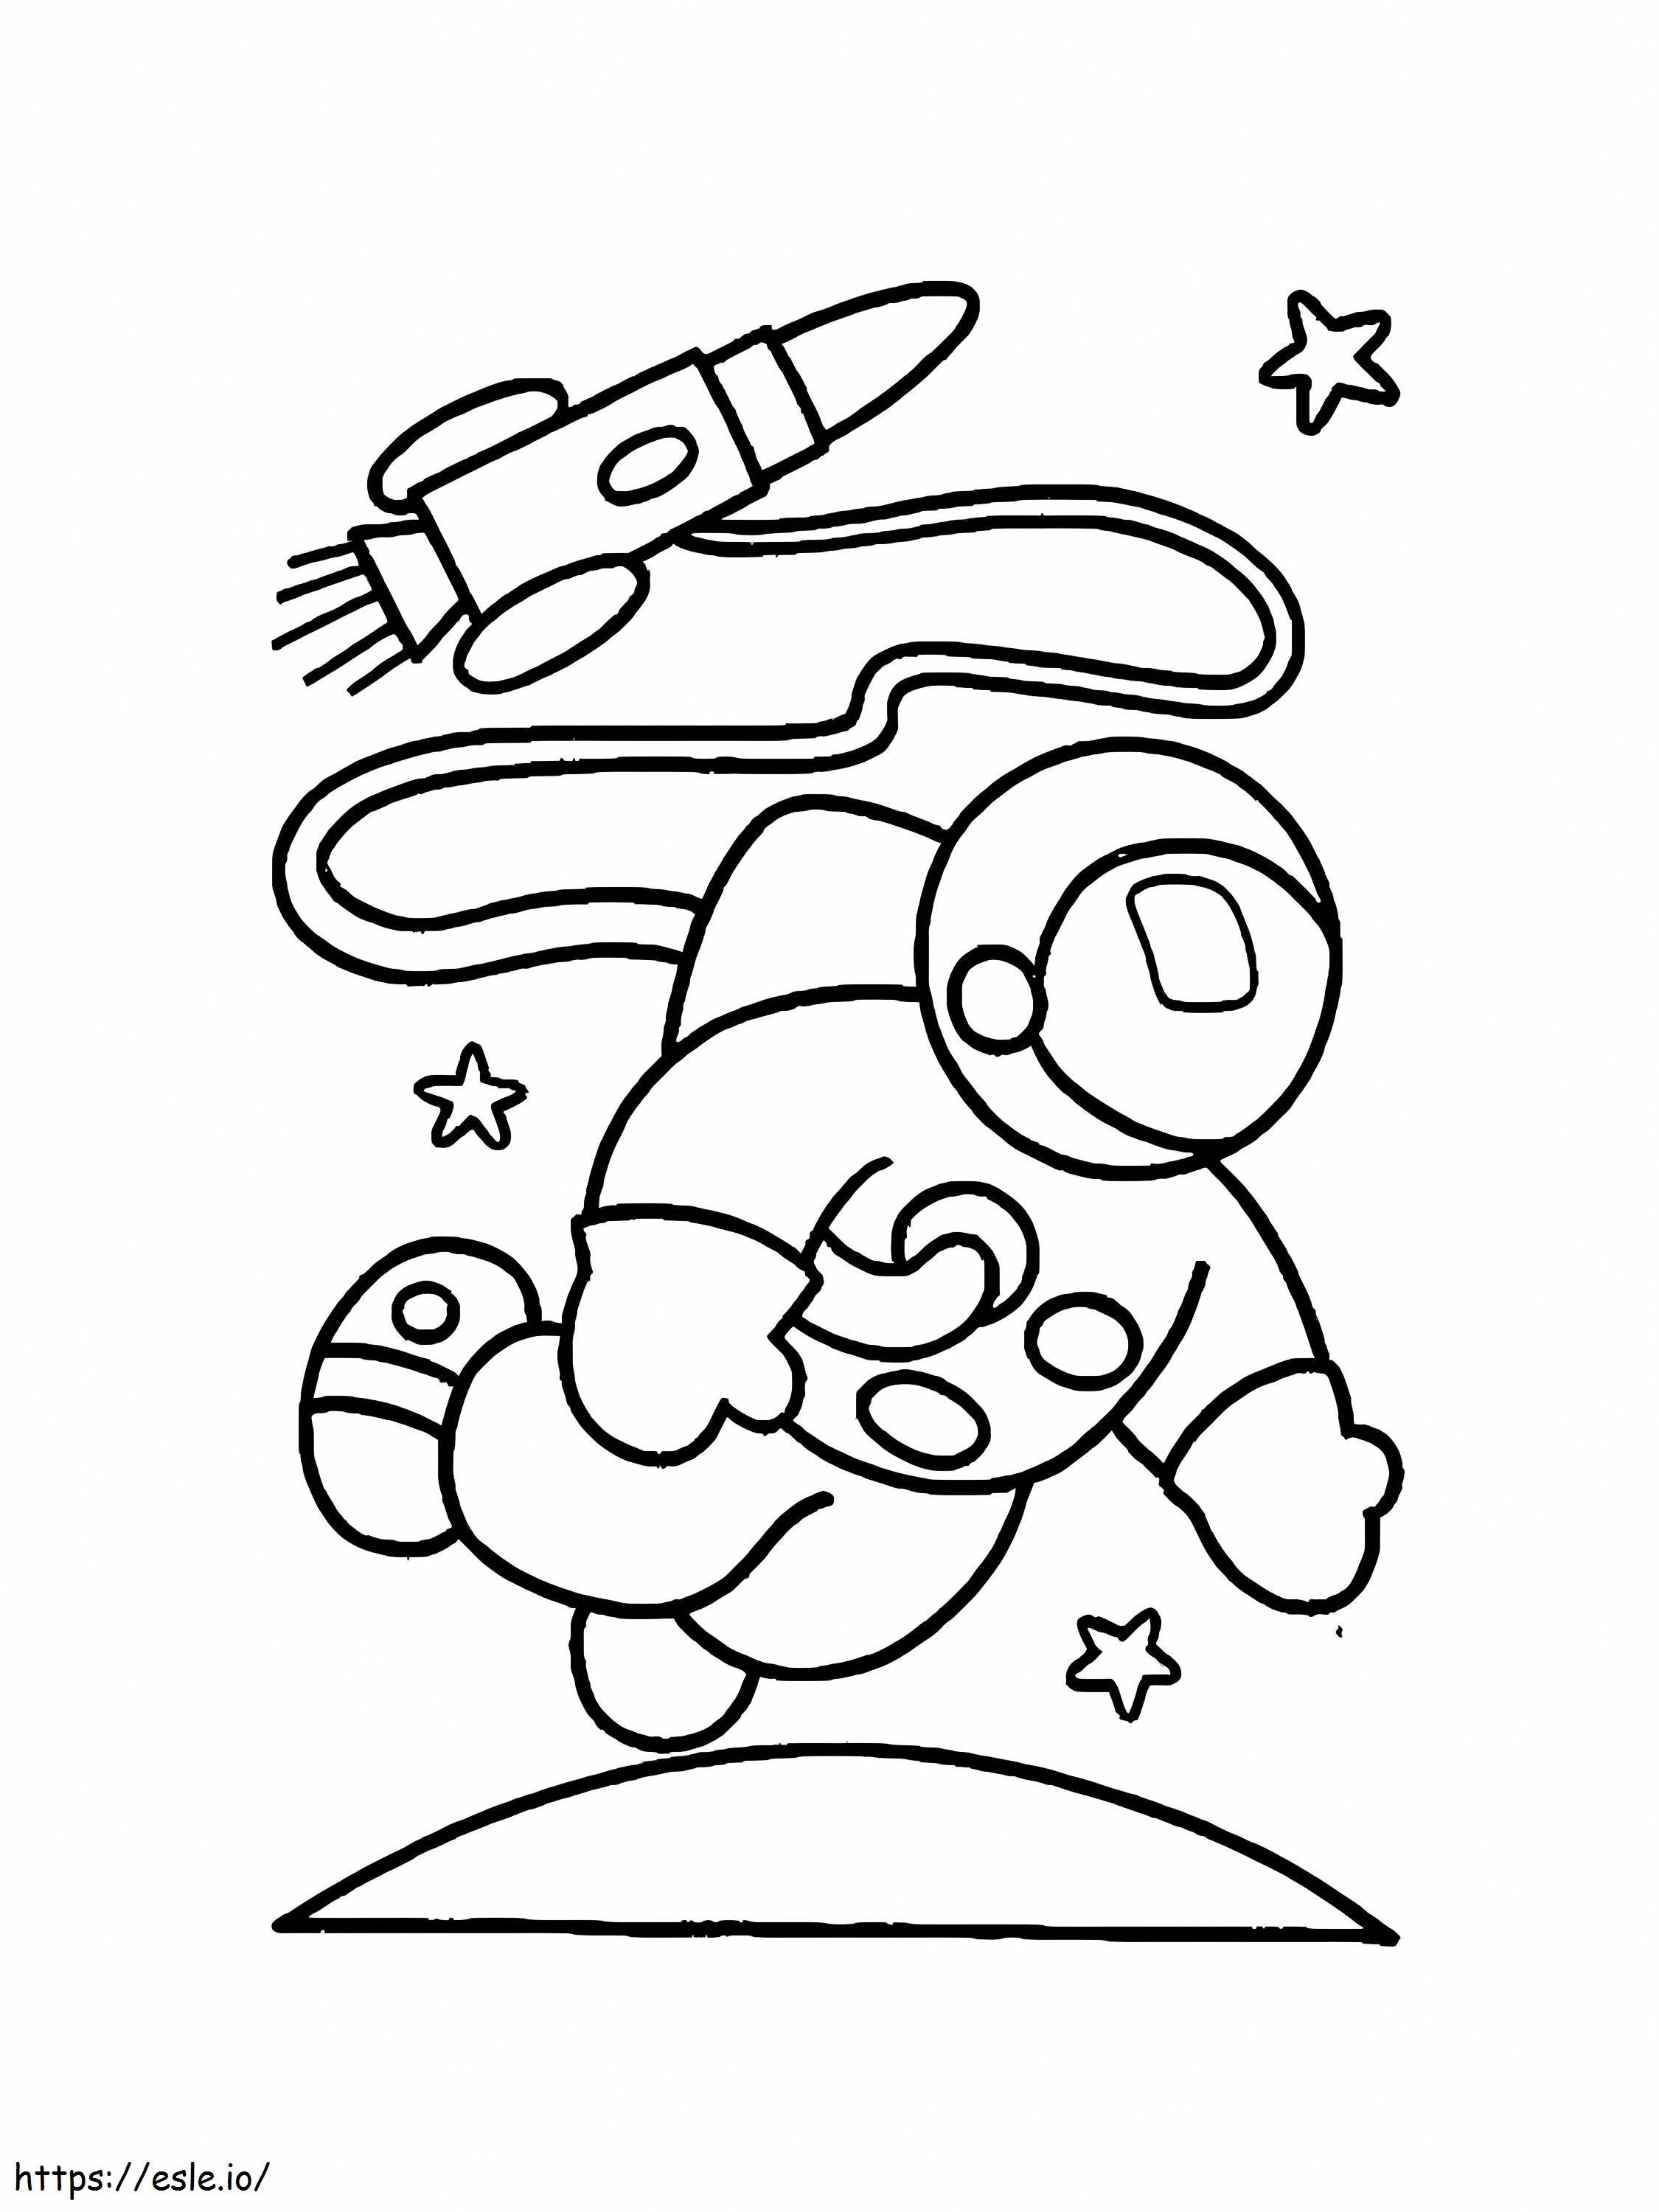 Astronaut Flying coloring page